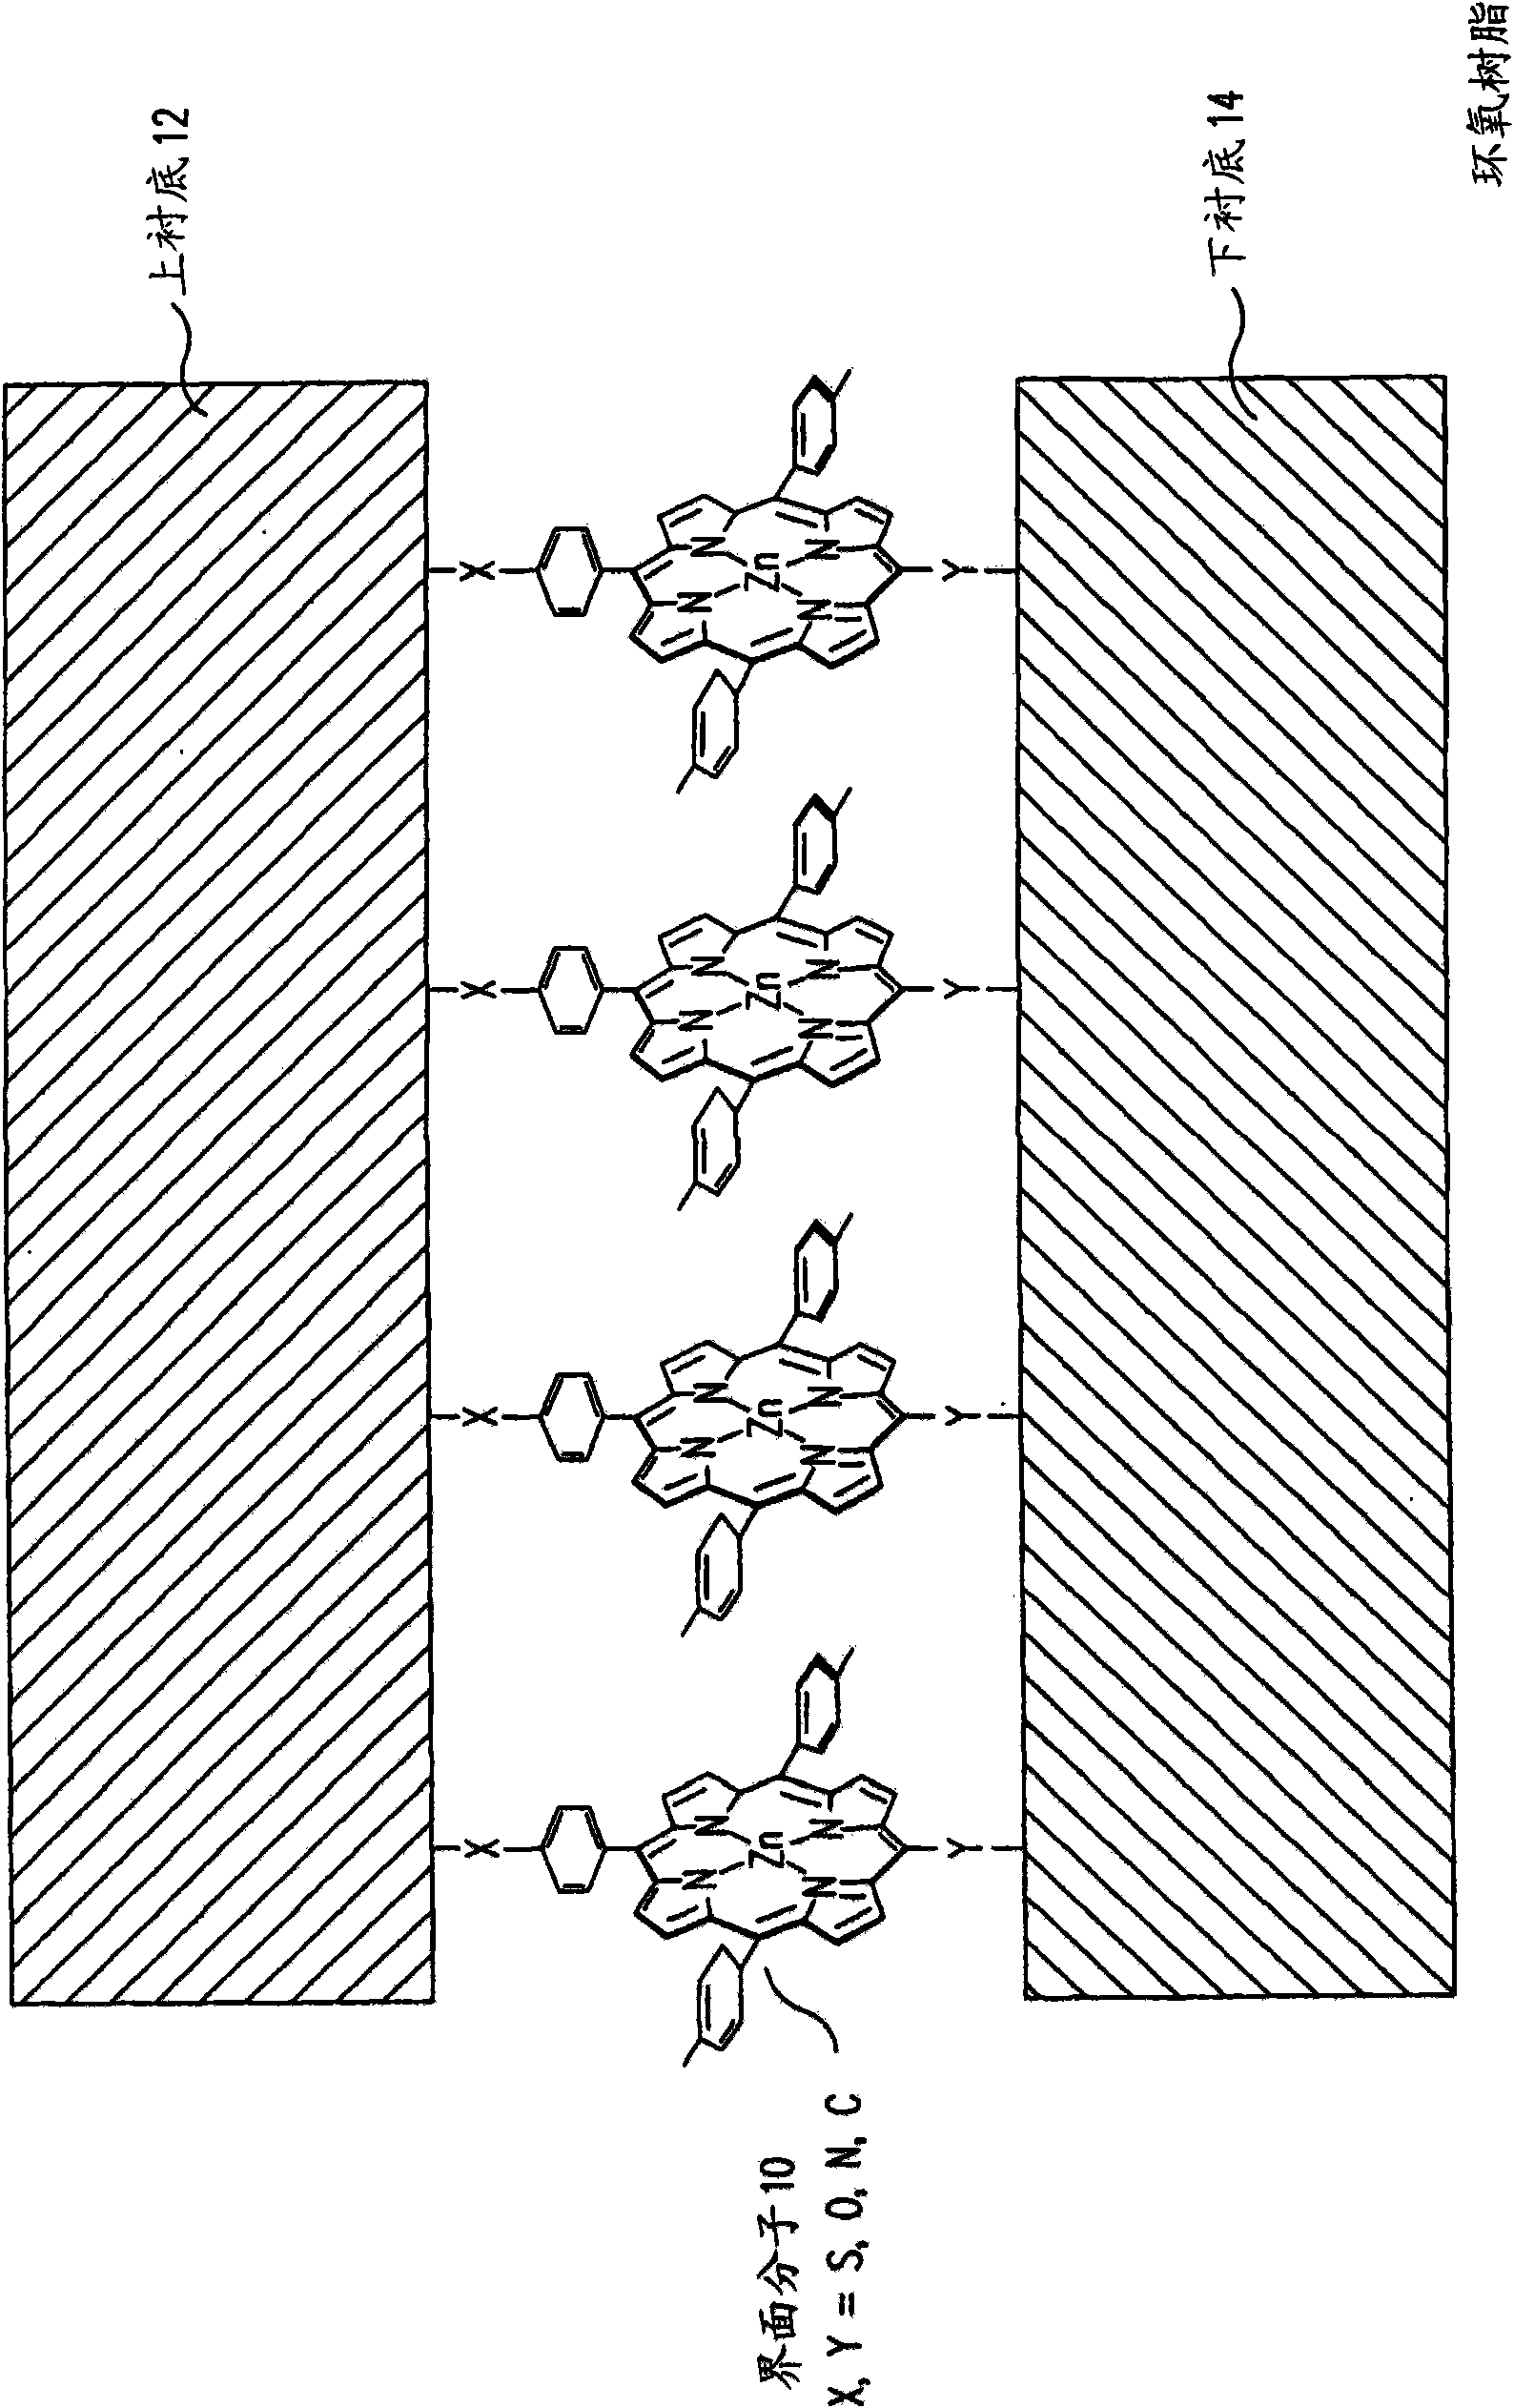 Methods of treating a surface to promote binding of molecule(s) of interest, coatings and devices formed therefrom